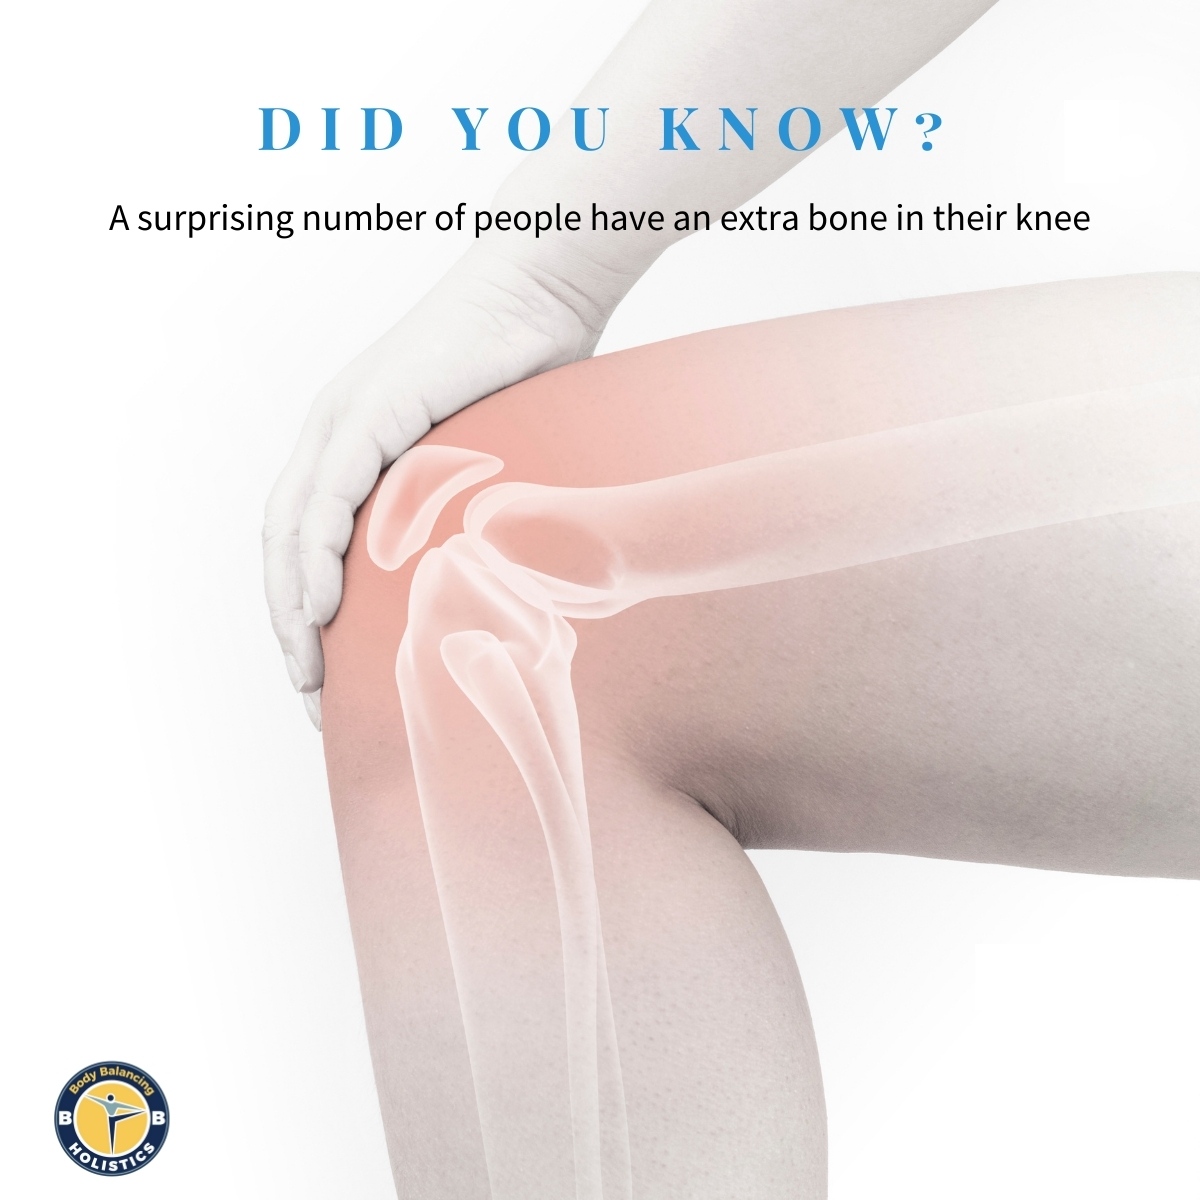 Turns out that some people have an extra bone in their knee called a fabella. 🦴

Over the last century, it's started to pop up on X-rays more and more. 🦵

#interestingfacts #didyouknow #factsabouthealth #healthandwellness #crazyfacts #factsyoudidntknow